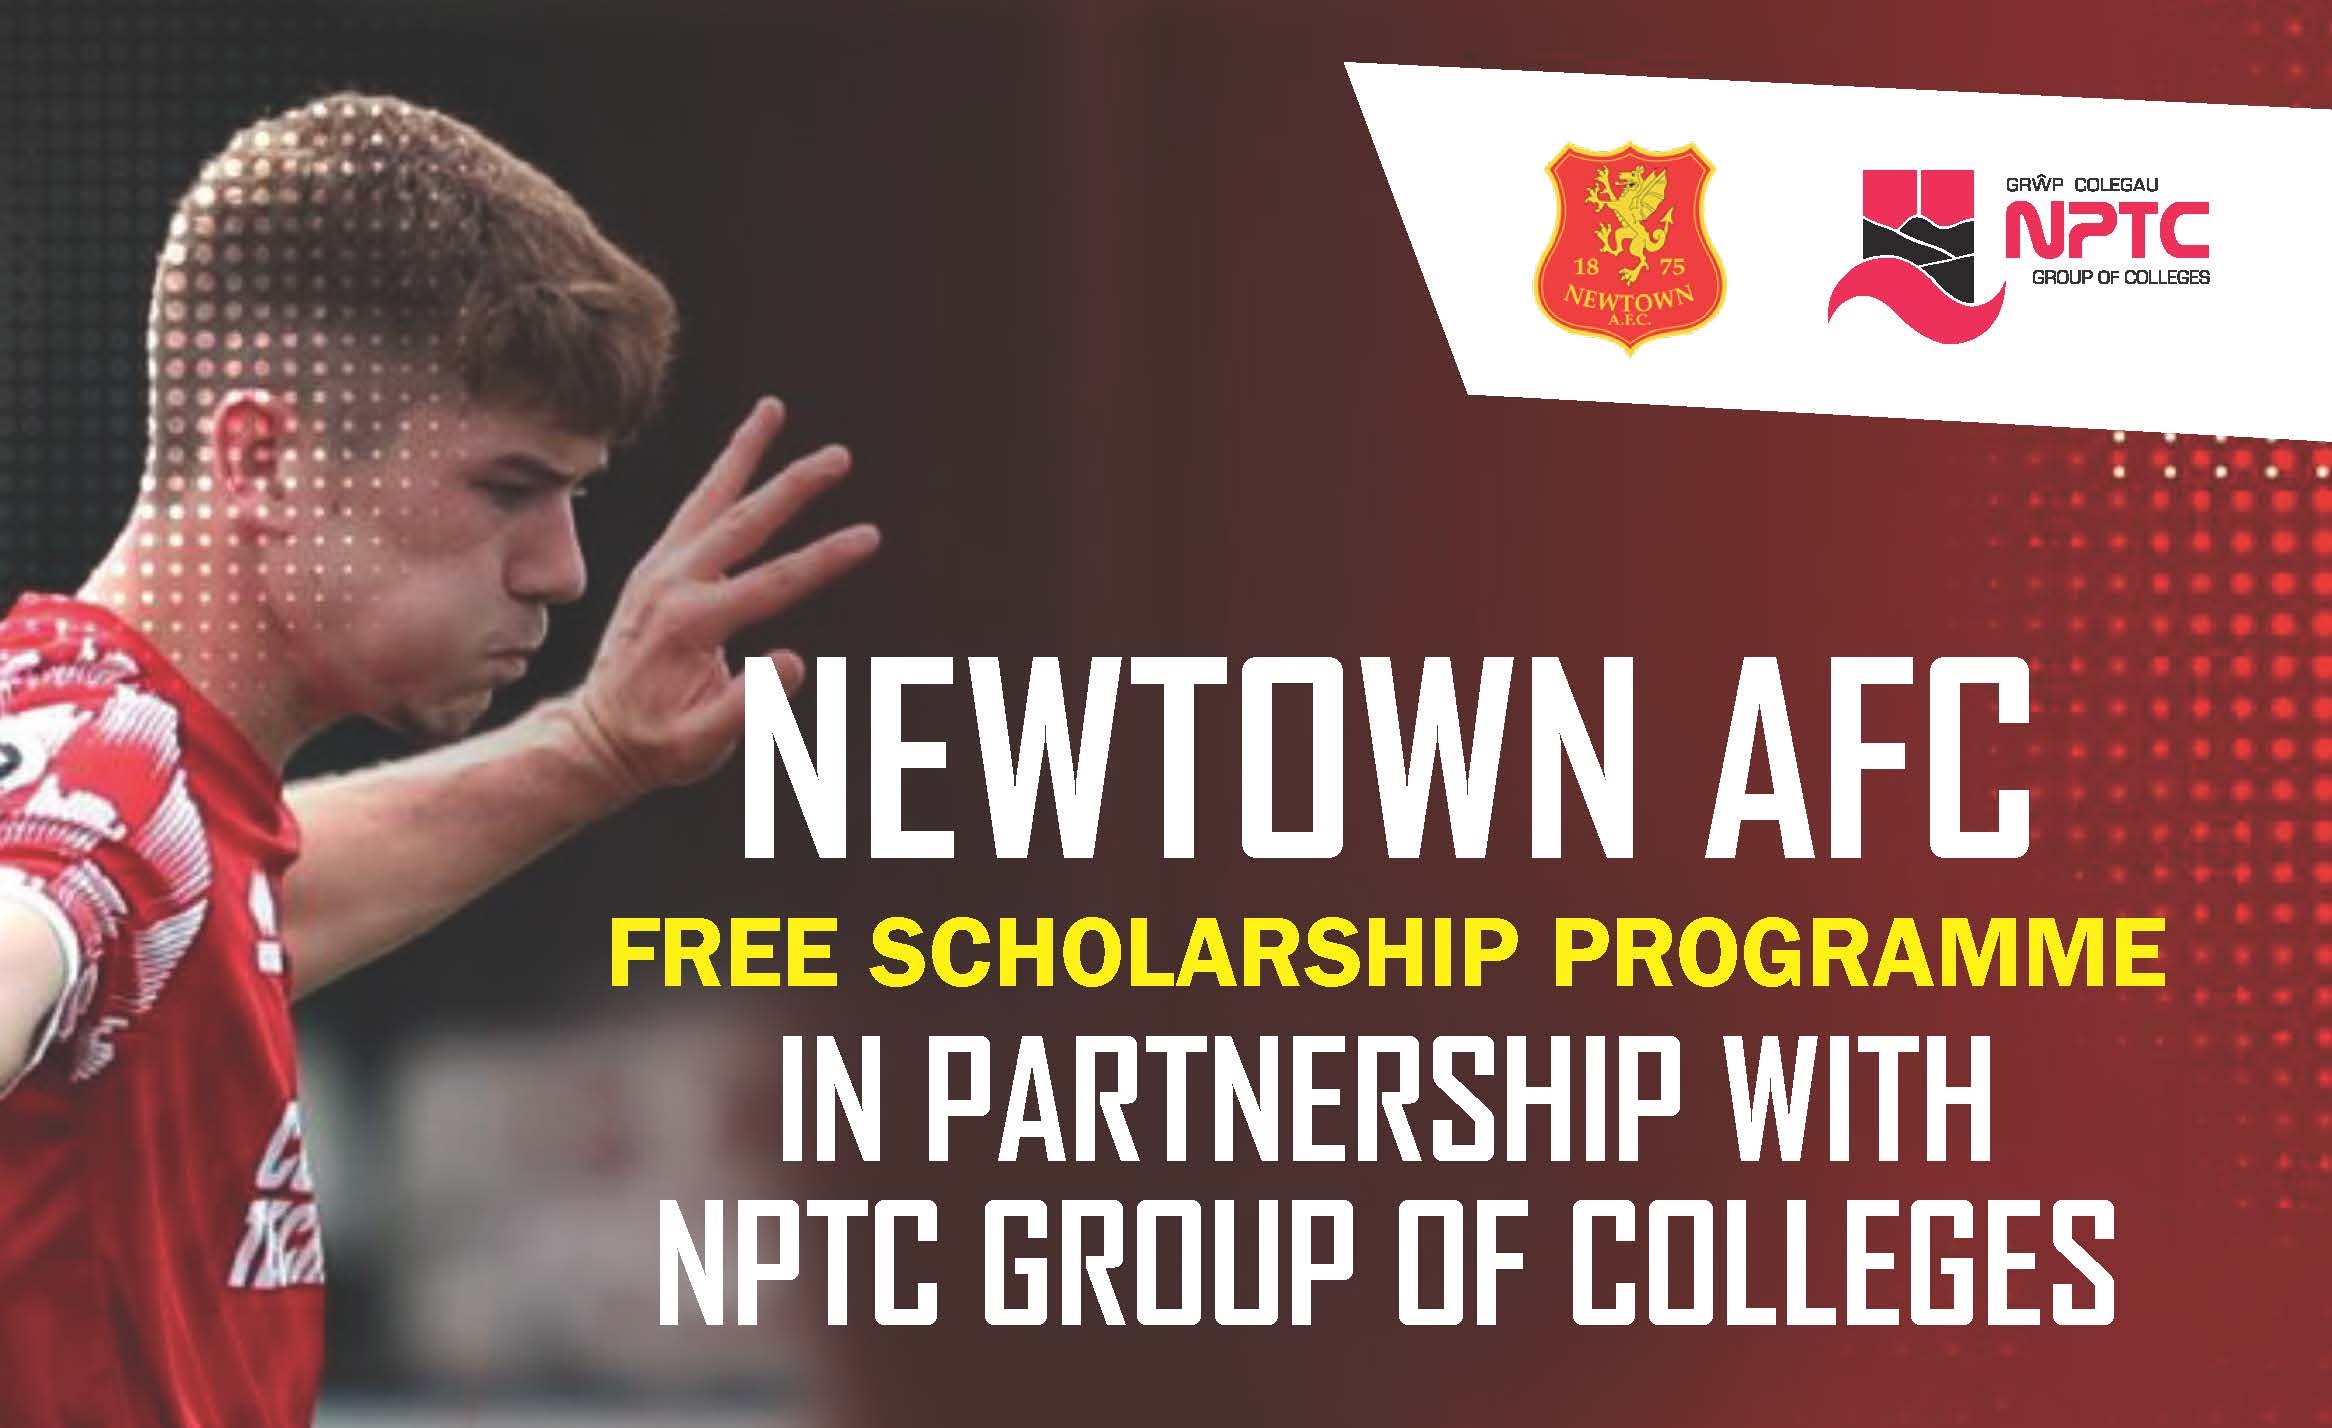 Photo of a Newtown AFC player with information on the new scholarship and partnership between Newtown College and Newtown AFC